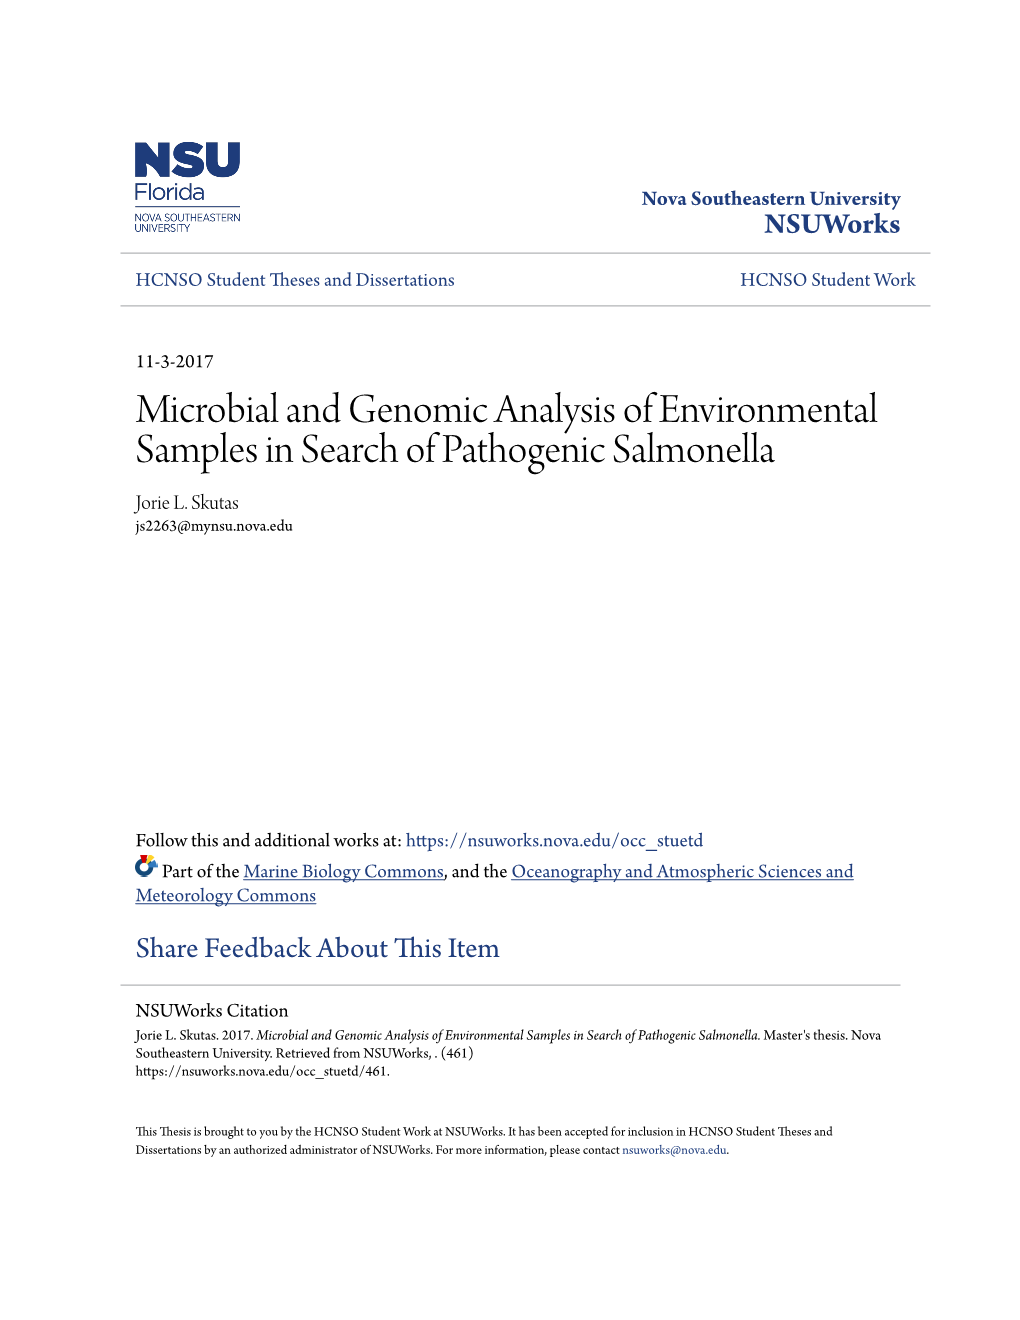 Microbial and Genomic Analysis of Environmental Samples in Search of Pathogenic Salmonella Jorie L